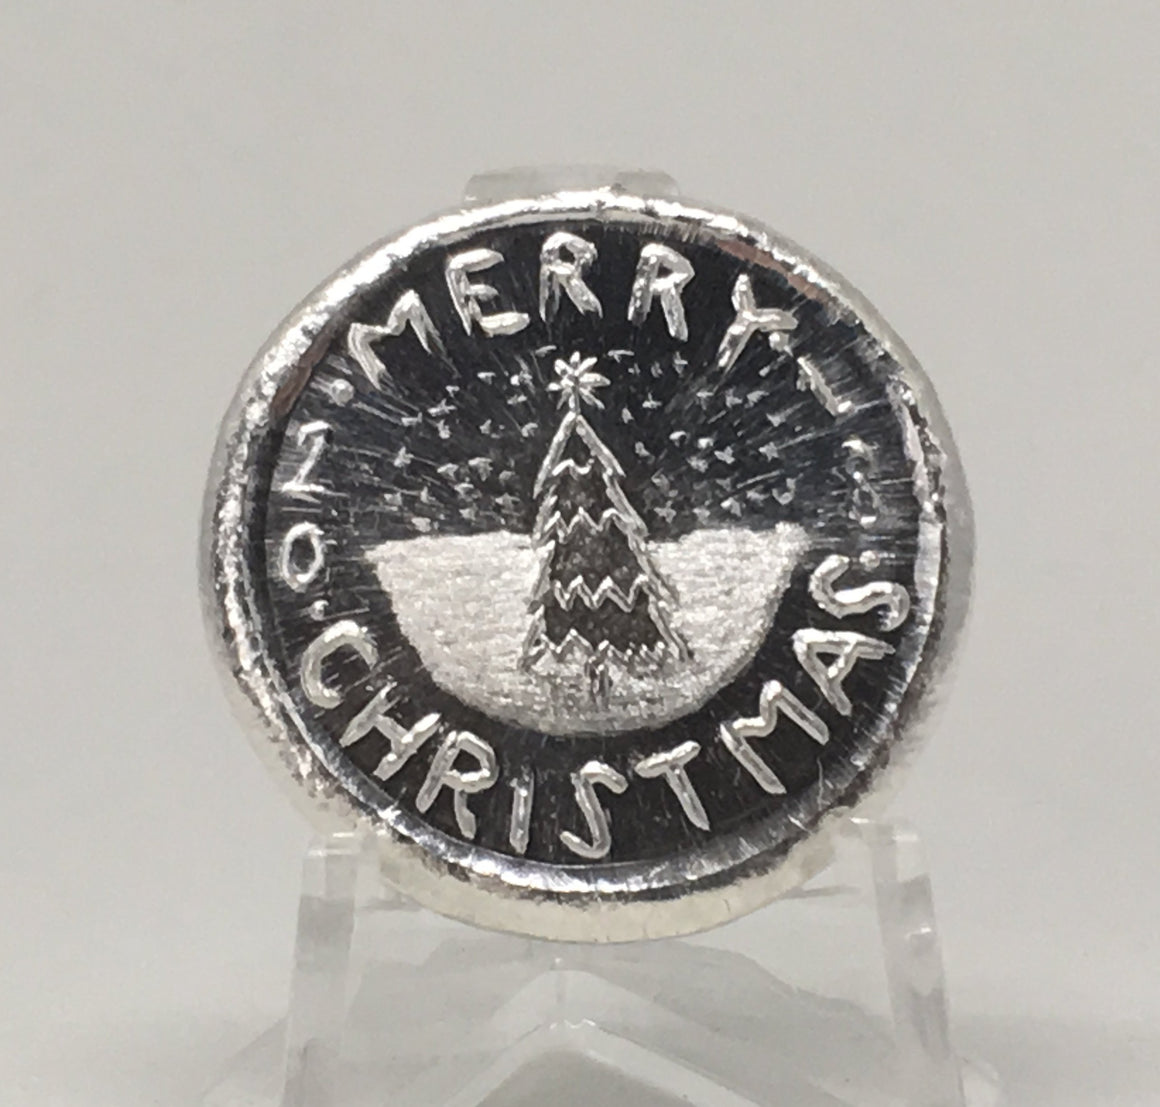 2018 Merry Christmas by Beaver Bullion 1oz Hand Poured .999 Silver